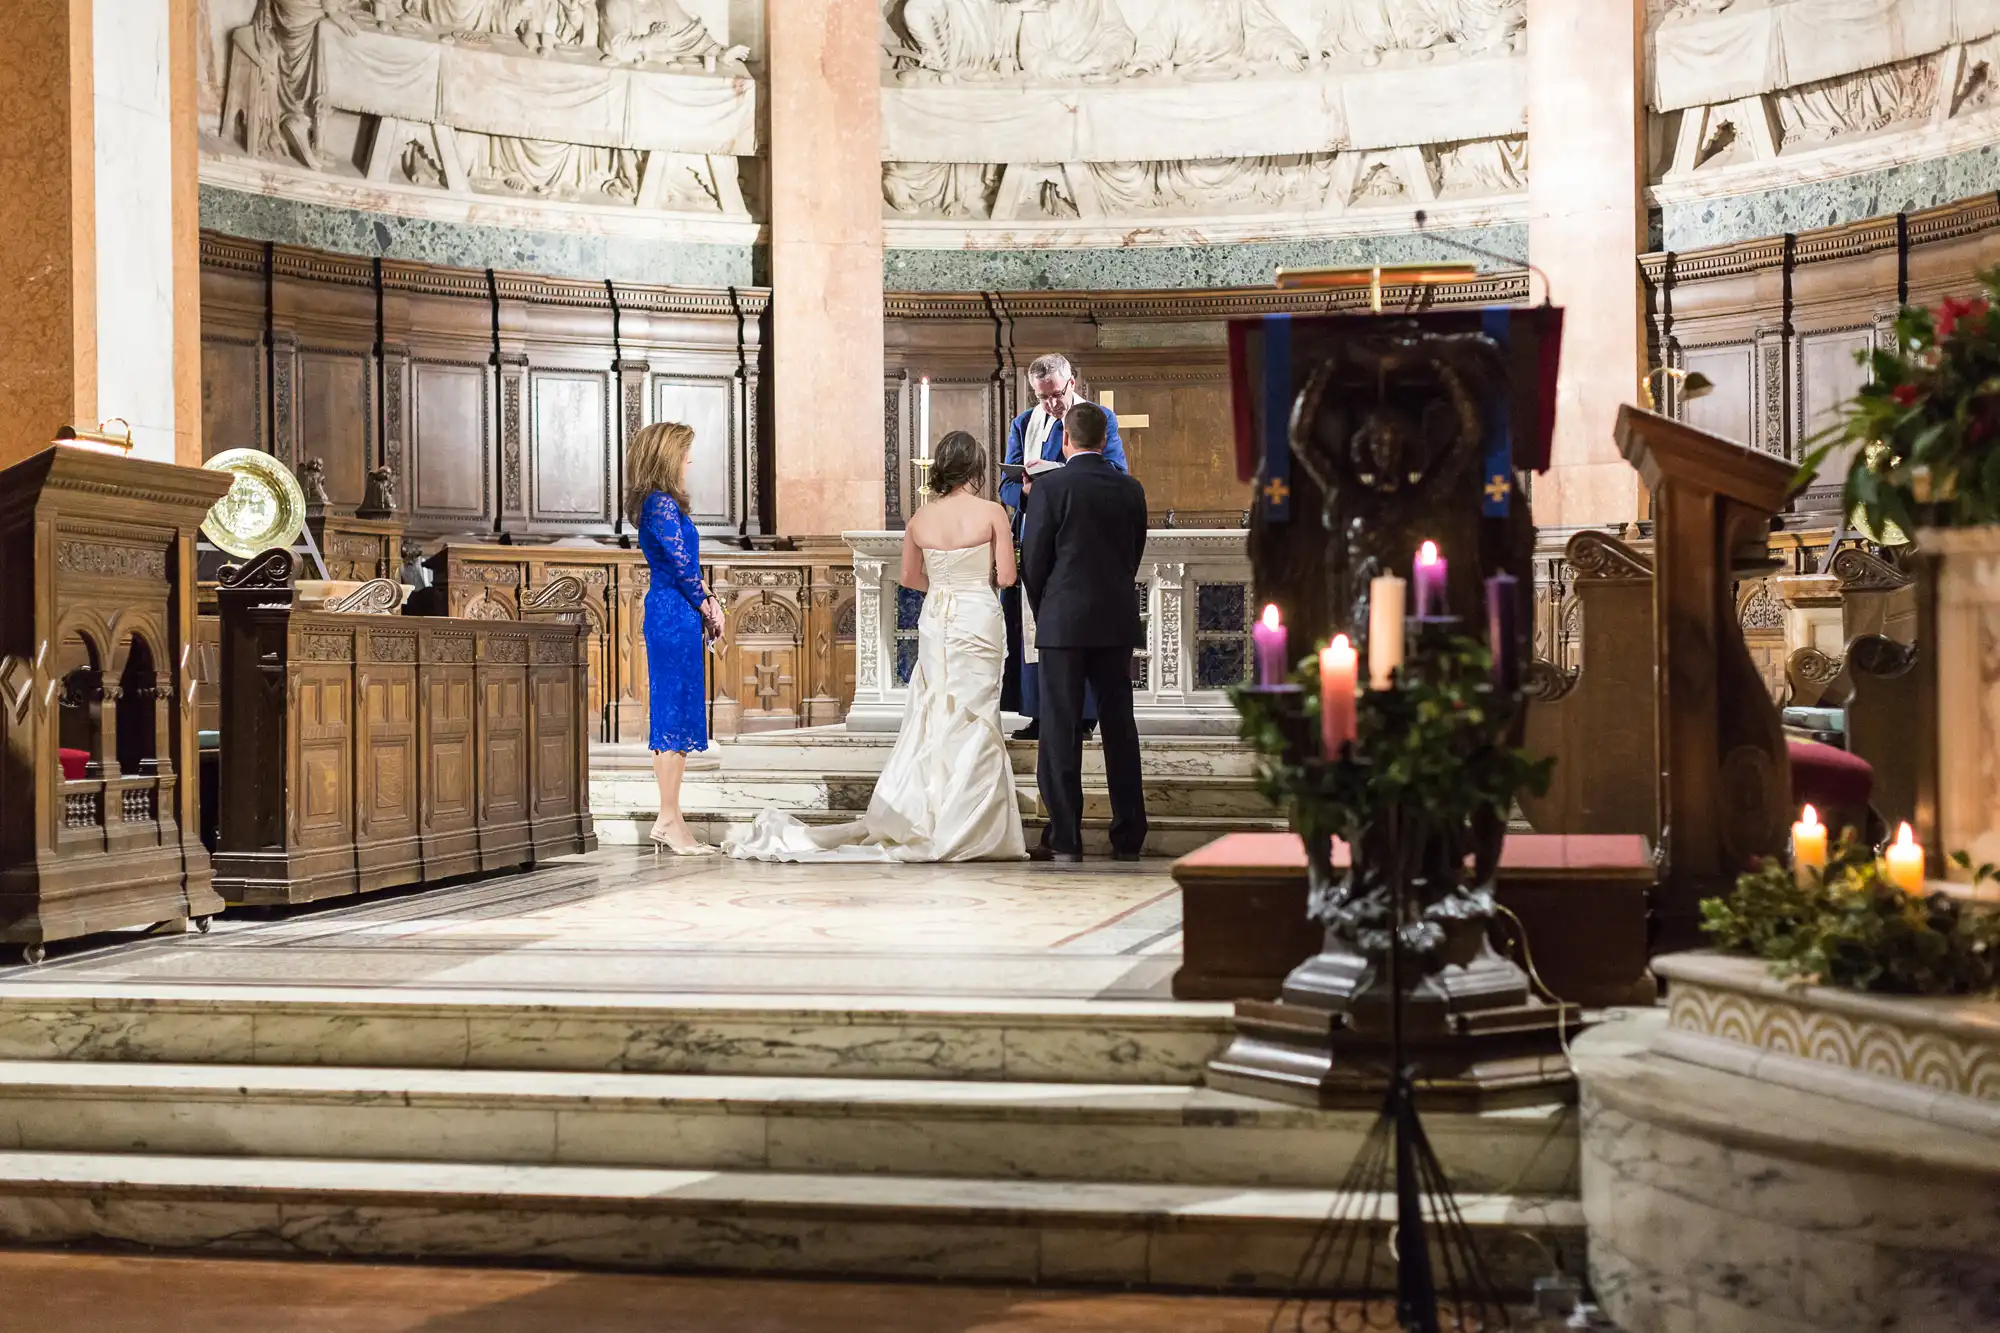 A wedding ceremony in a grand church with a couple standing before an officiant, flanked by two guests, surrounded by candles and marble architecture.